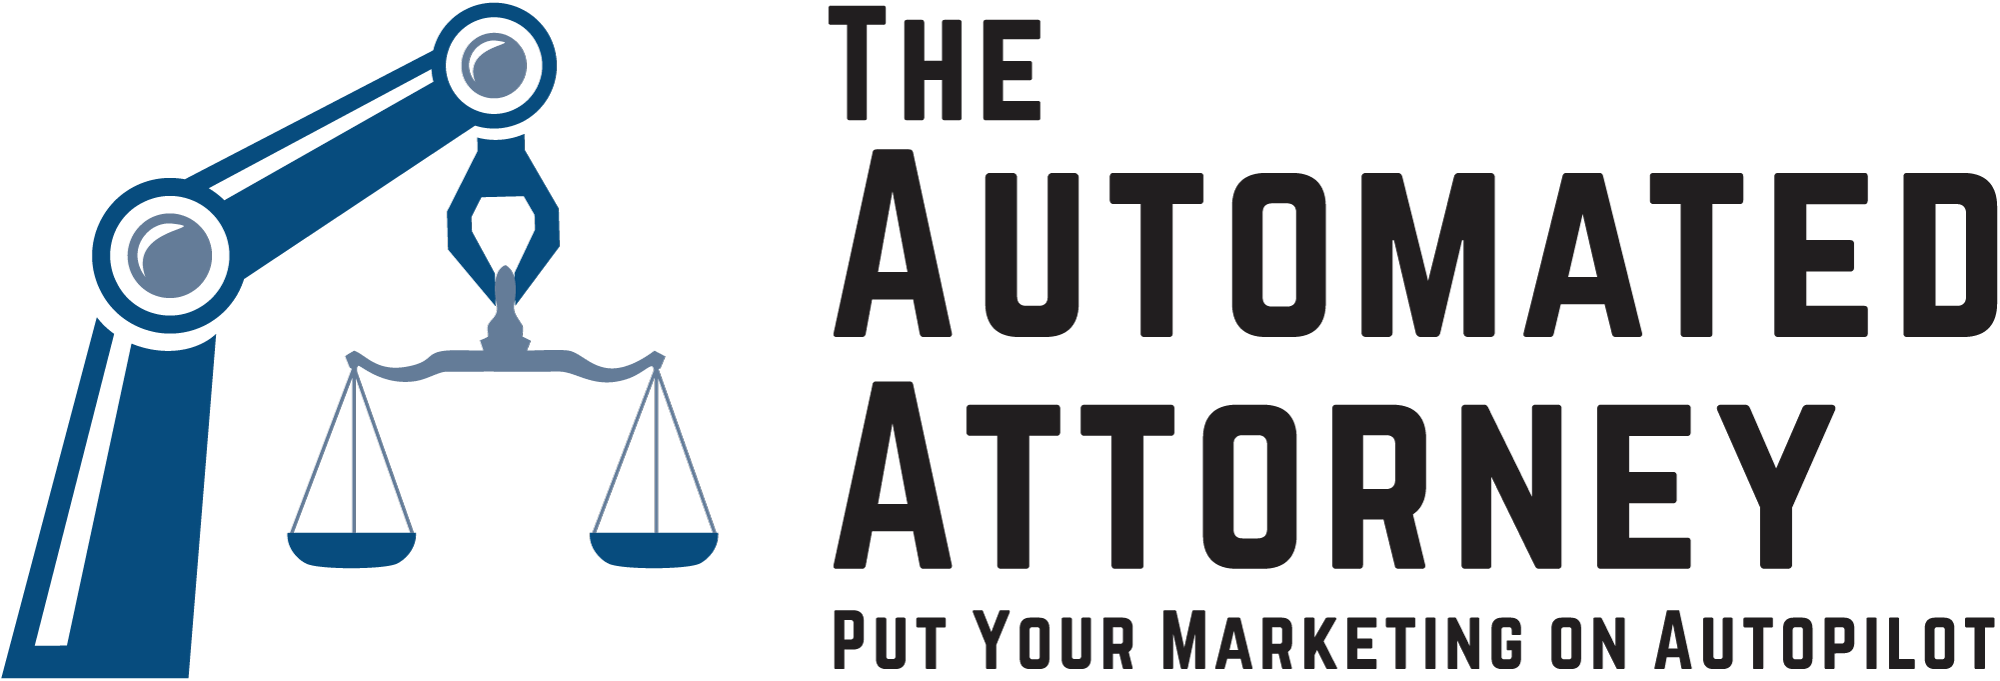 The Automated Attorney Logo PNG blue